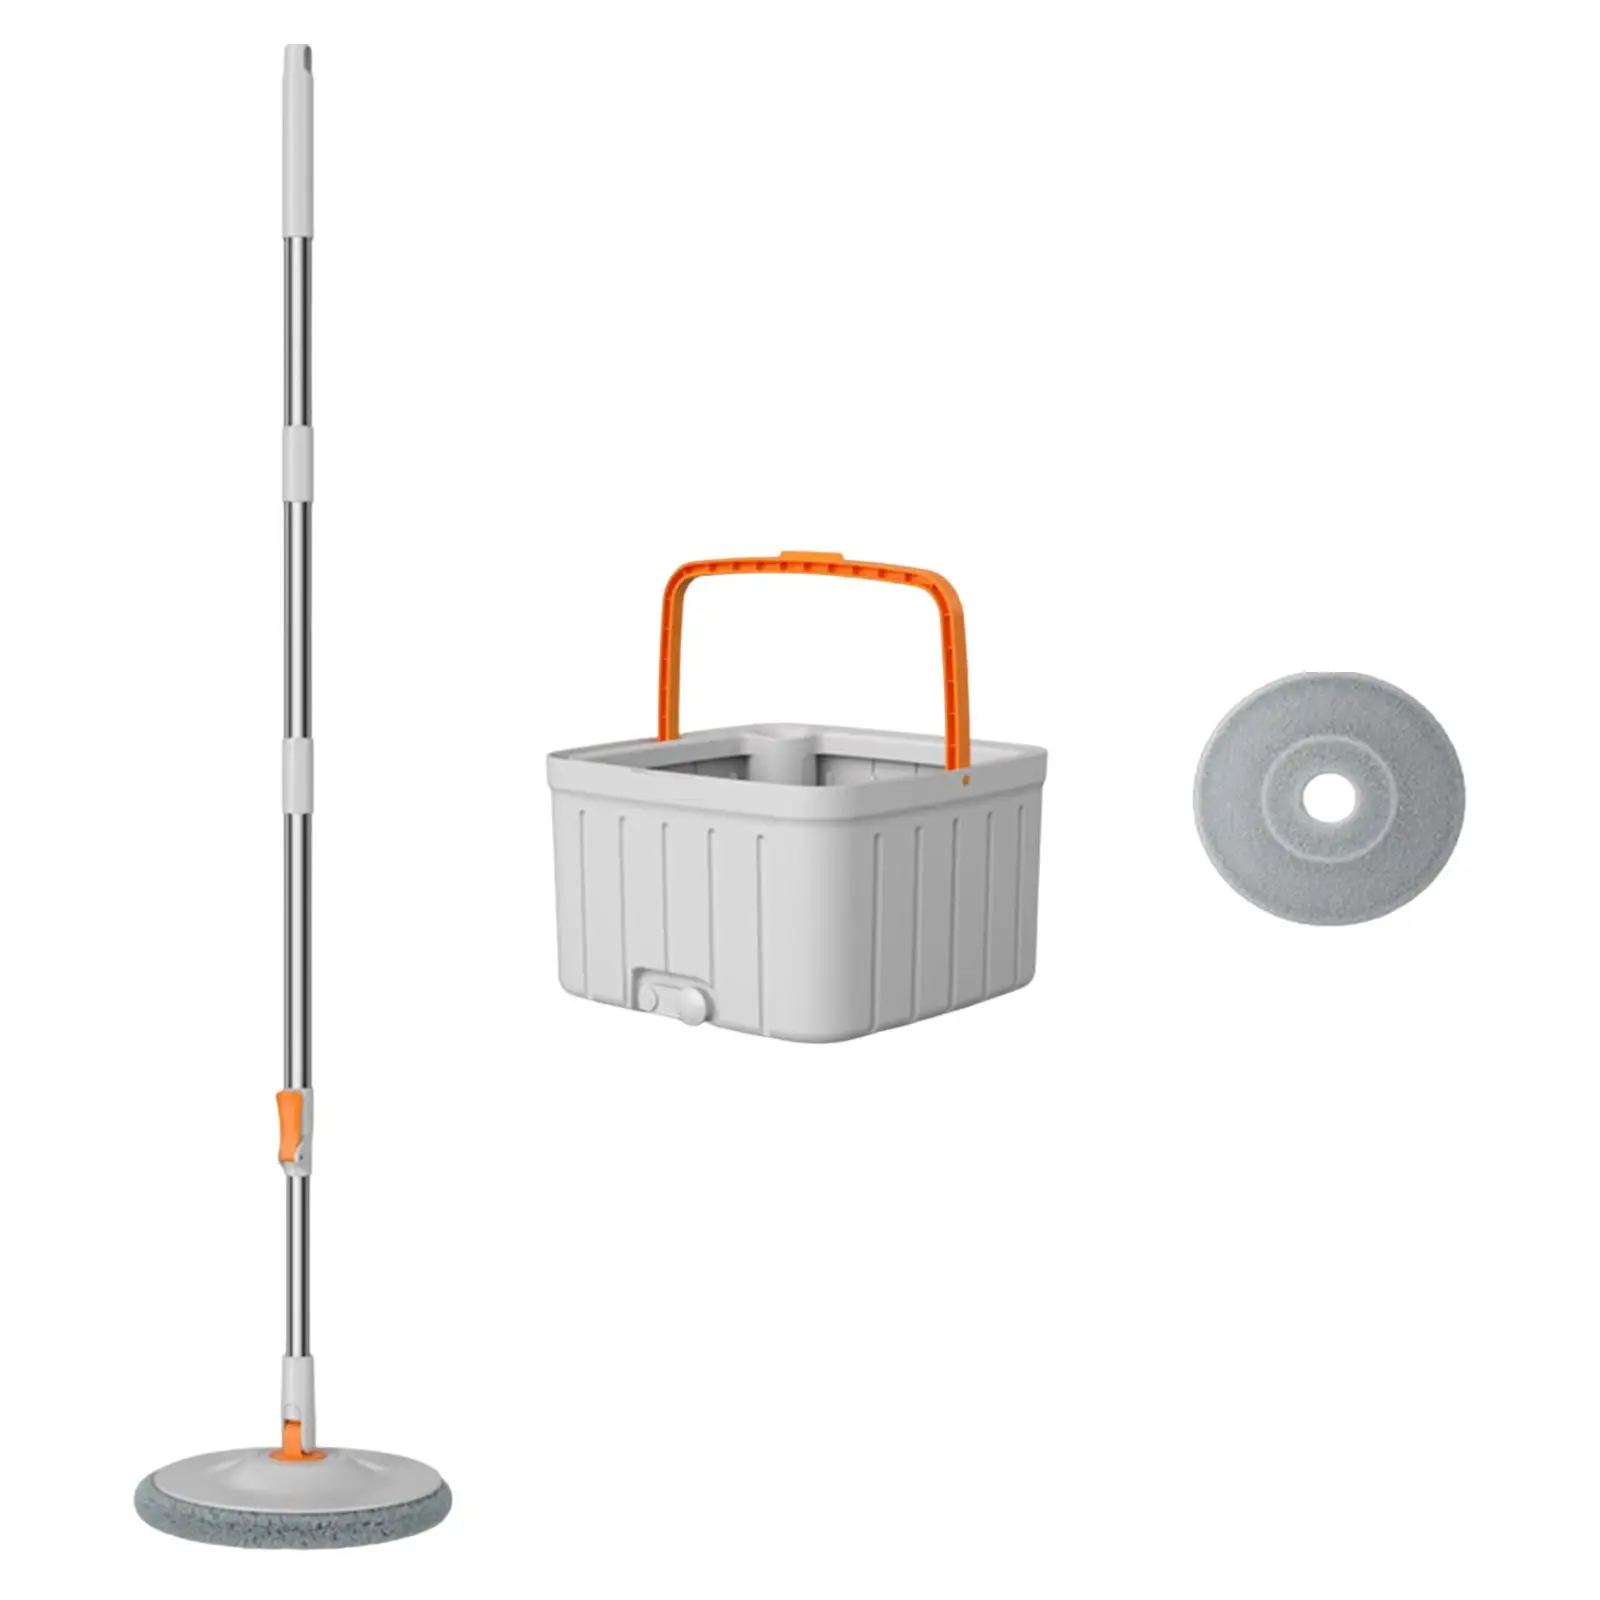 Round Flat Floor Mop Bucket Set Floor Cleaning system with Thick Microfiber Mop Pad